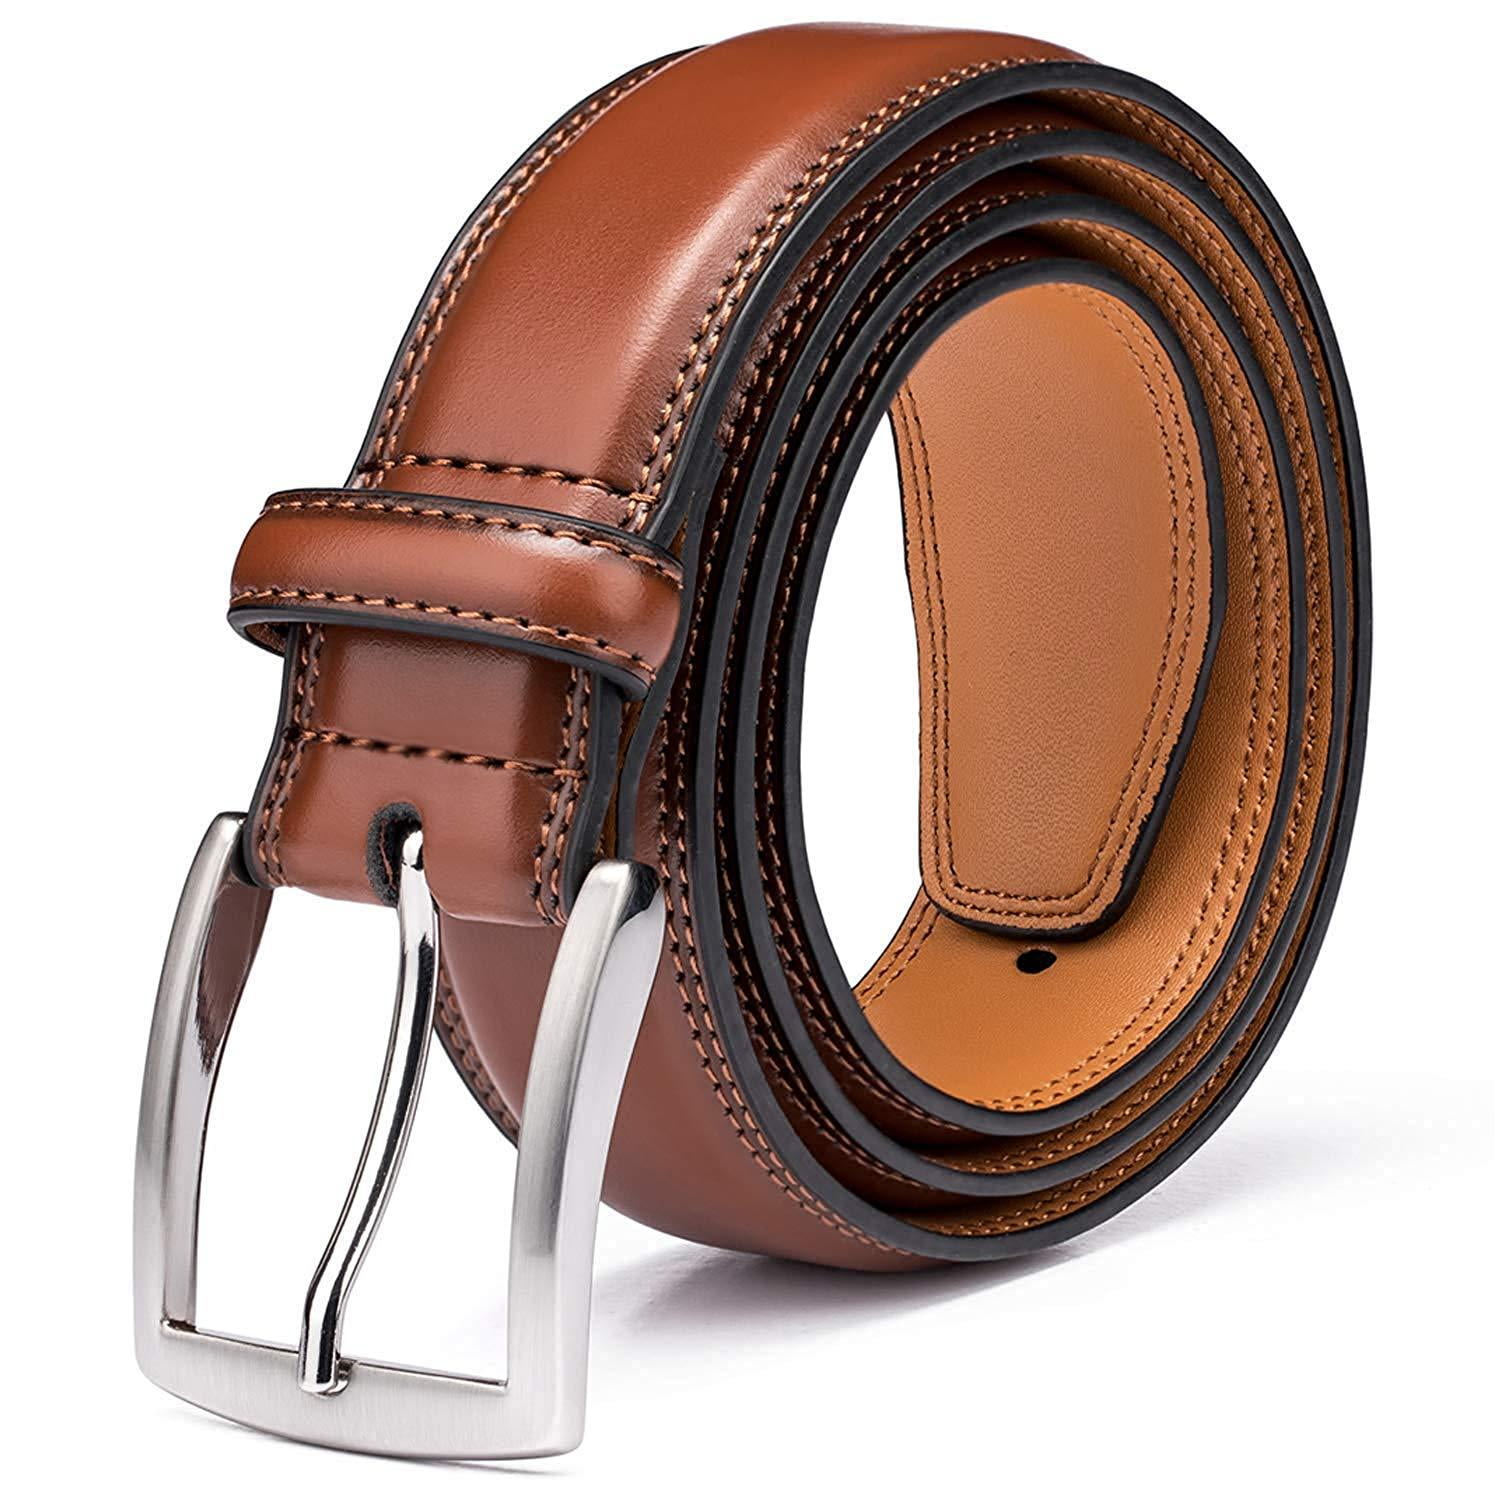 Men's Belt, Genuine Leather Dress Belts for Men with Single Prong Buckle-  Classic & Fashion Design for Work Business and Casual (Brown, 34in)